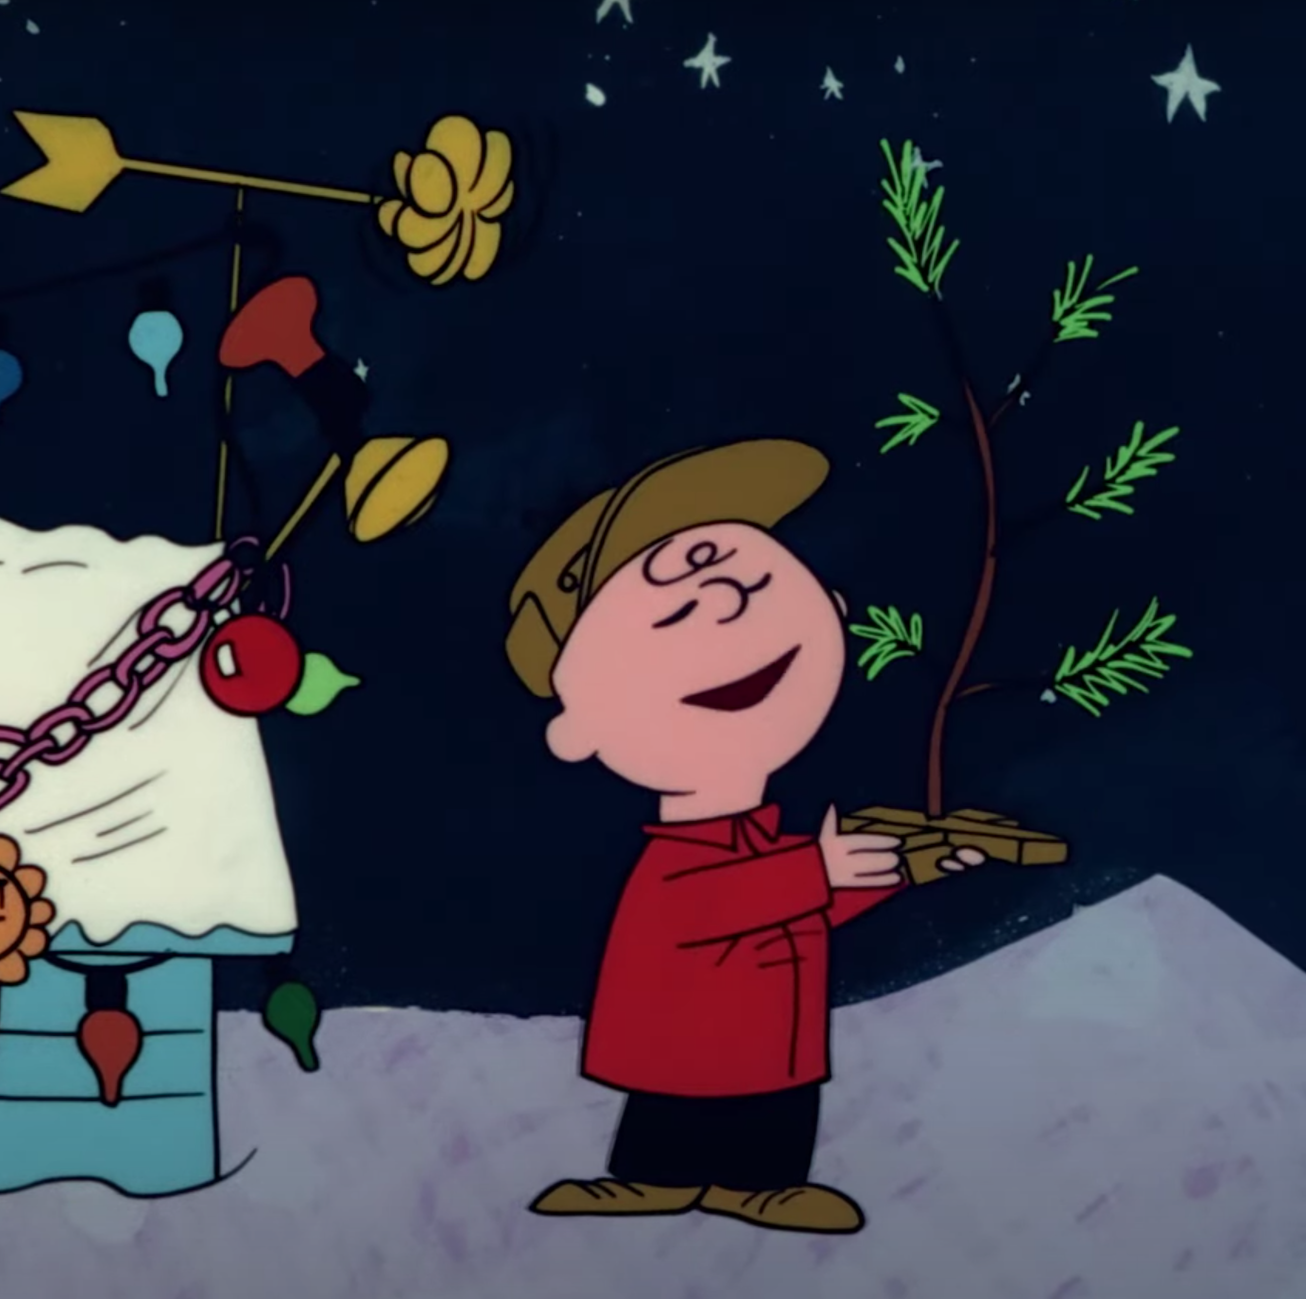 Where to Watch 'A Charlie Brown Christmas' in 2023